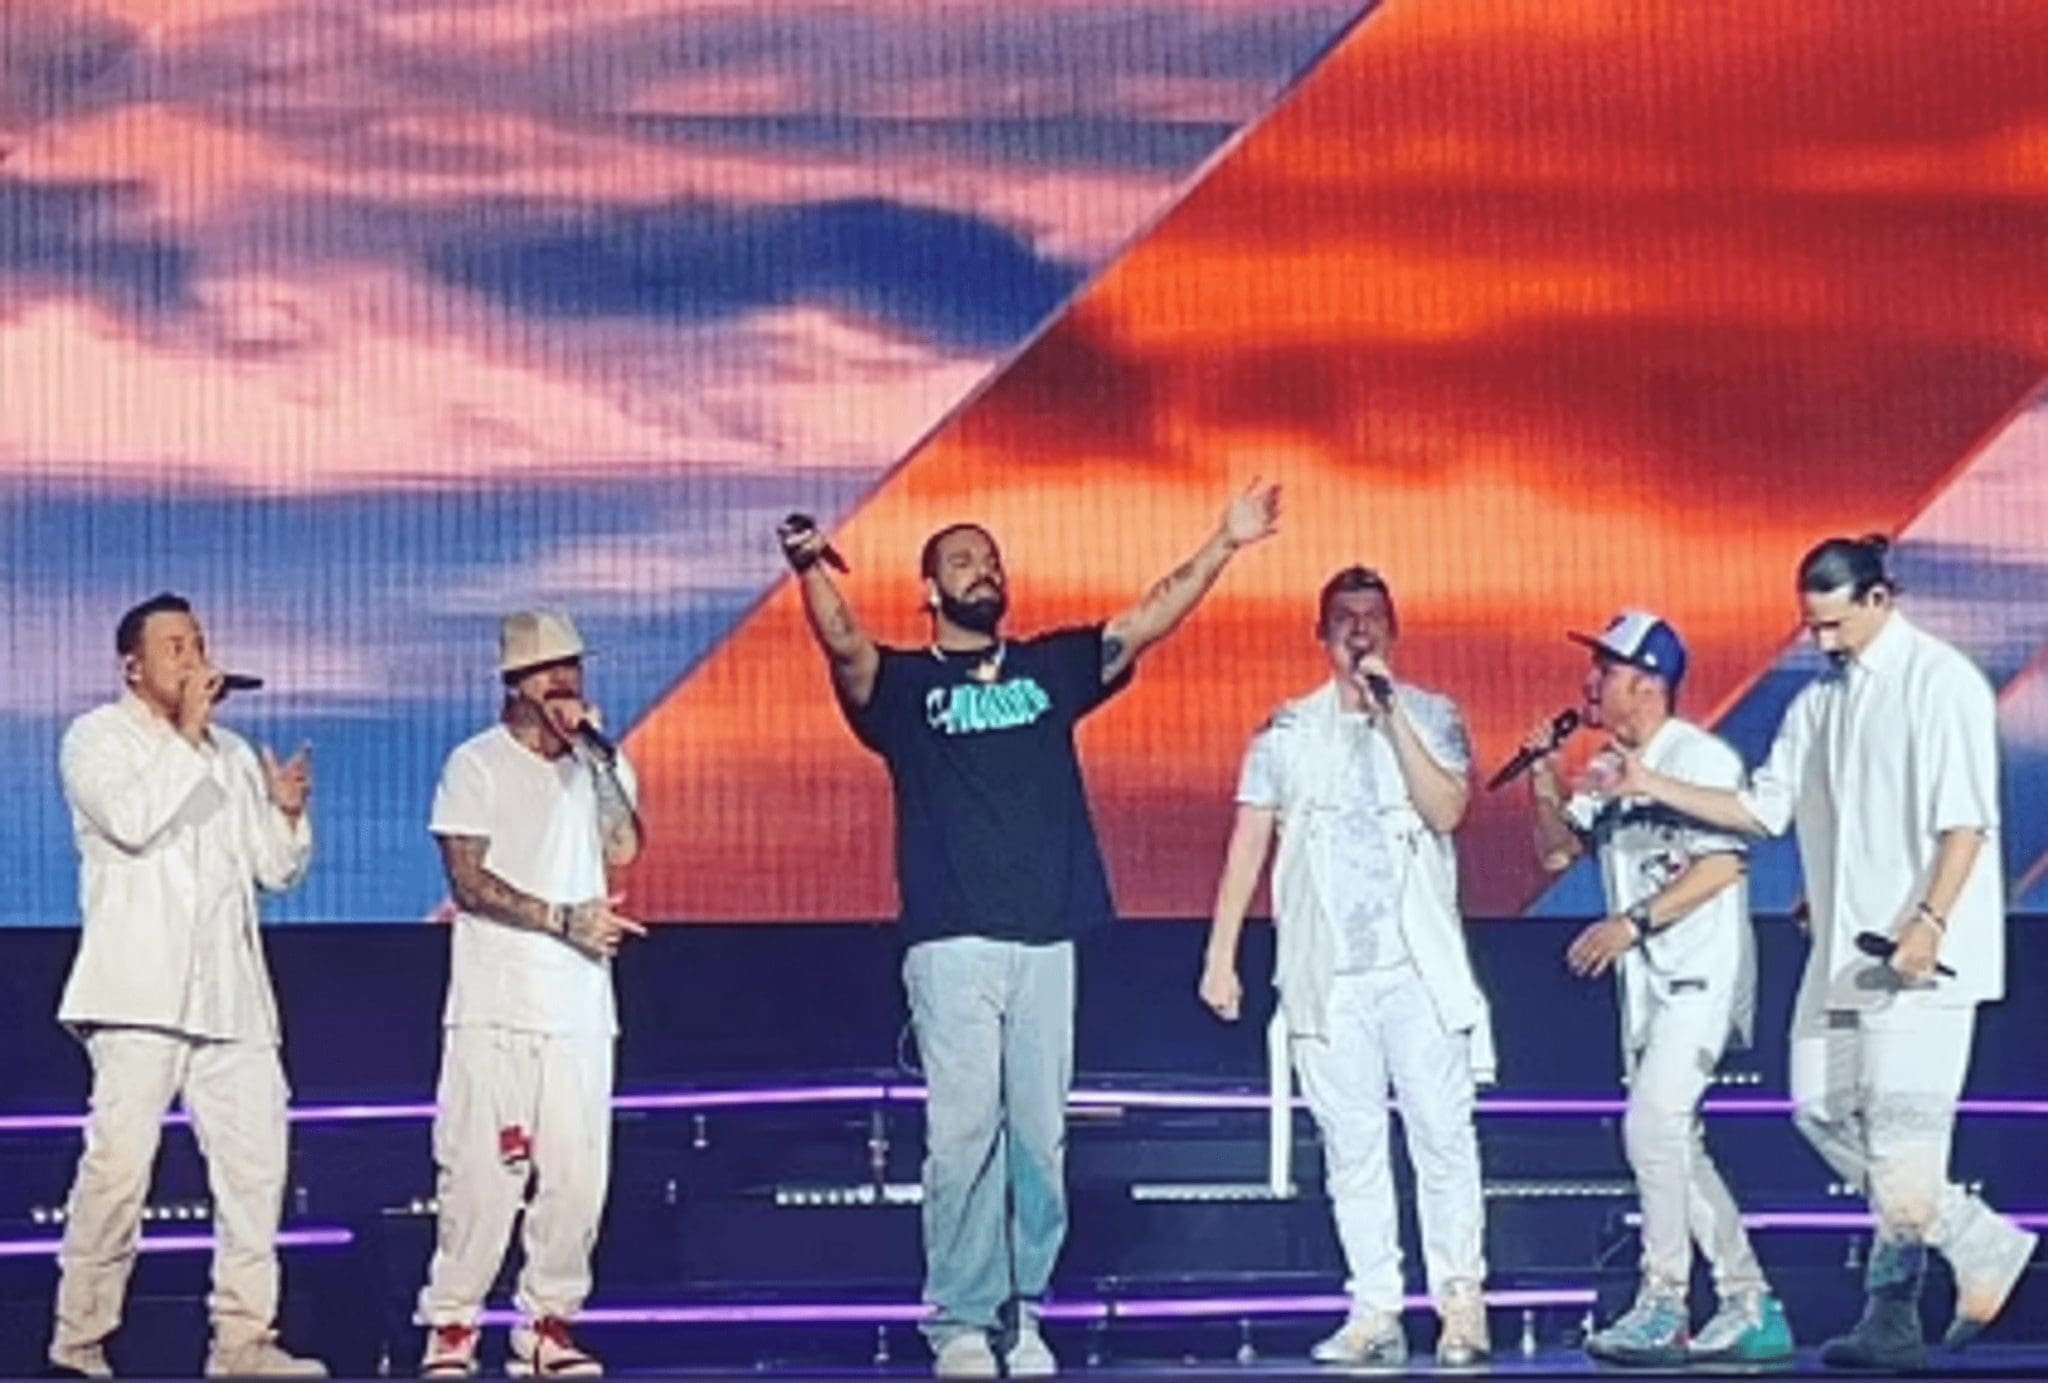 Drake performed with the Backstreet Boys: Together they performed one of the group's biggest hits, 'I Want It That Way'